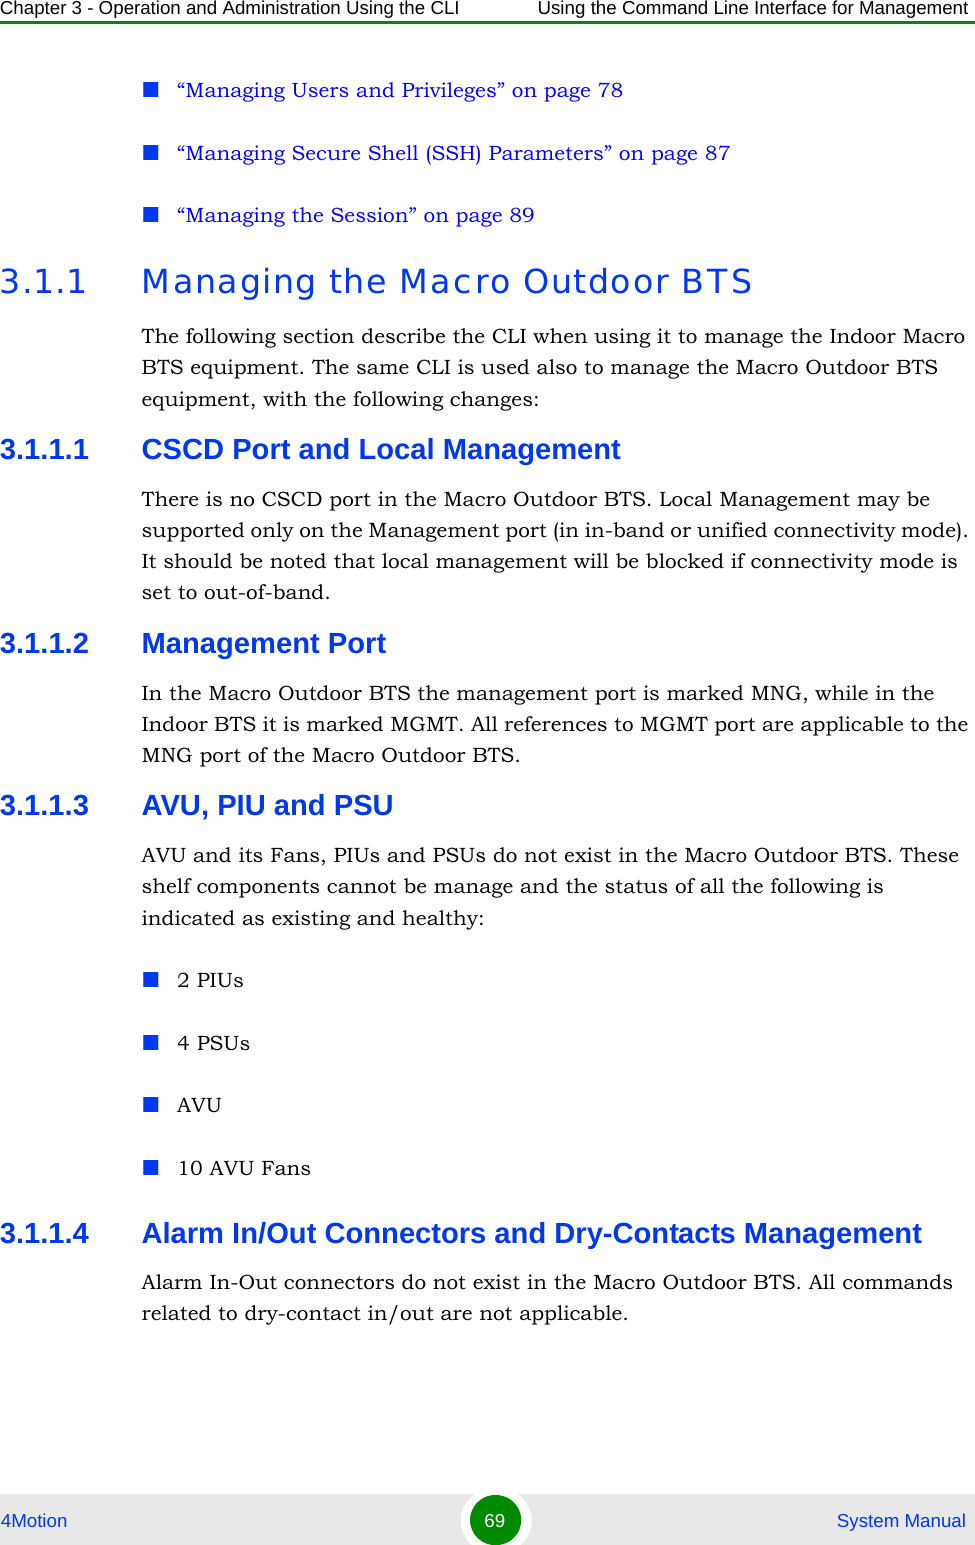 Chapter 3 - Operation and Administration Using the CLI Using the Command Line Interface for Management4Motion 69  System Manual“Managing Users and Privileges” on page 78“Managing Secure Shell (SSH) Parameters” on page 87“Managing the Session” on page 893.1.1 Managing the Macro Outdoor BTSThe following section describe the CLI when using it to manage the Indoor Macro BTS equipment. The same CLI is used also to manage the Macro Outdoor BTS equipment, with the following changes:3.1.1.1 CSCD Port and Local ManagementThere is no CSCD port in the Macro Outdoor BTS. Local Management may be supported only on the Management port (in in-band or unified connectivity mode). It should be noted that local management will be blocked if connectivity mode is set to out-of-band.3.1.1.2 Management PortIn the Macro Outdoor BTS the management port is marked MNG, while in the Indoor BTS it is marked MGMT. All references to MGMT port are applicable to the MNG port of the Macro Outdoor BTS.3.1.1.3 AVU, PIU and PSUAVU and its Fans, PIUs and PSUs do not exist in the Macro Outdoor BTS. These shelf components cannot be manage and the status of all the following is indicated as existing and healthy:2 PIUs4 PSUsAVU10 AVU Fans3.1.1.4 Alarm In/Out Connectors and Dry-Contacts ManagementAlarm In-Out connectors do not exist in the Macro Outdoor BTS. All commands related to dry-contact in/out are not applicable.